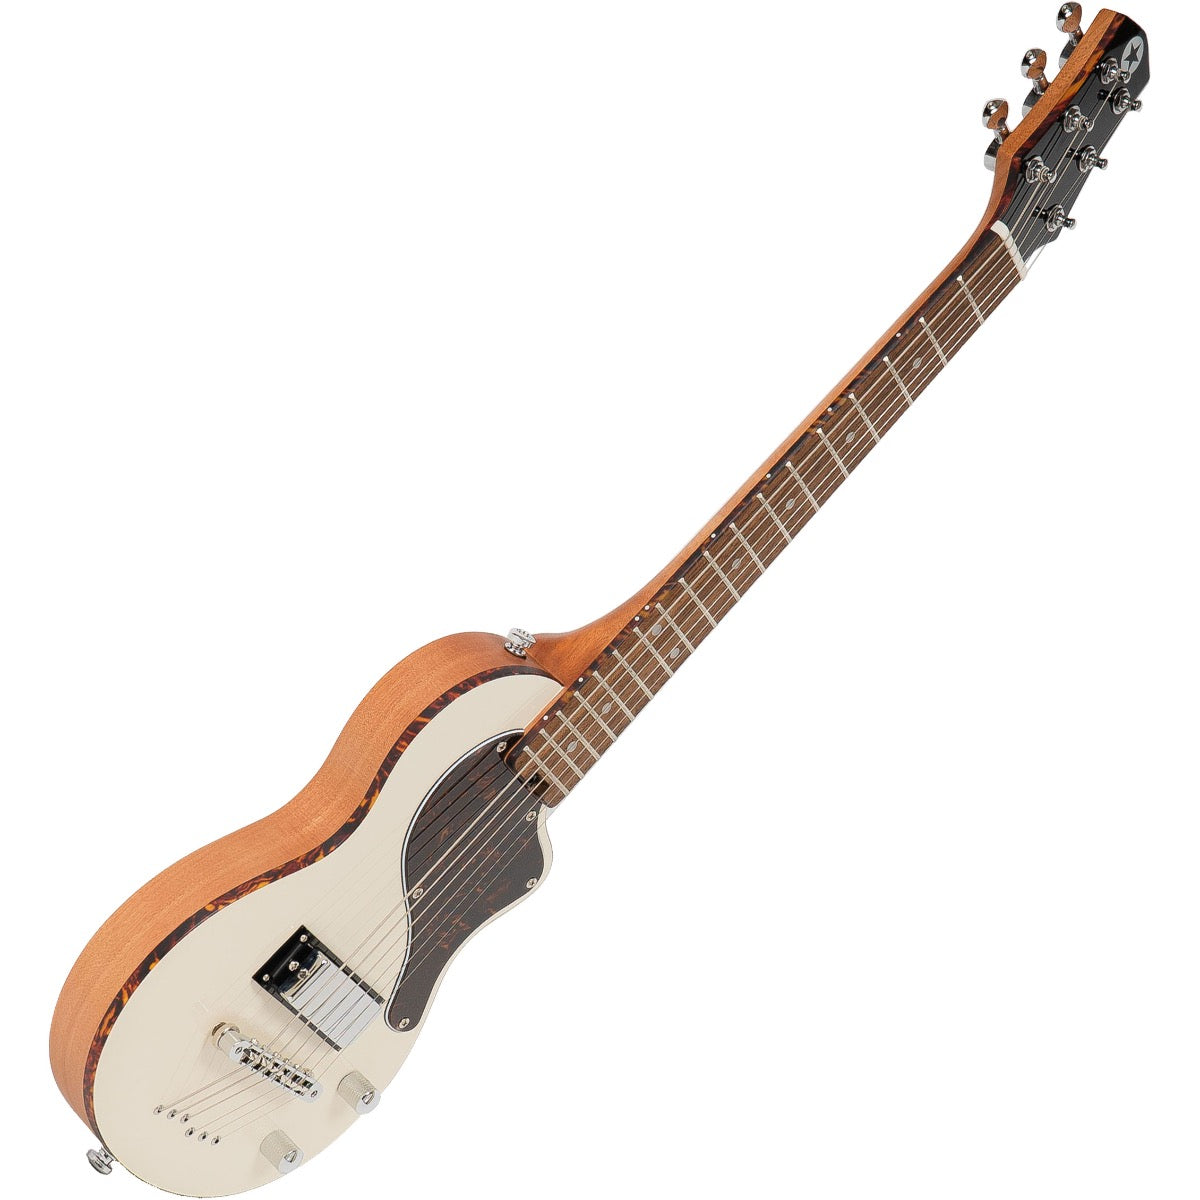 Perspective view of Blackstar Carry-On Travel Guitar - White showing top and left side